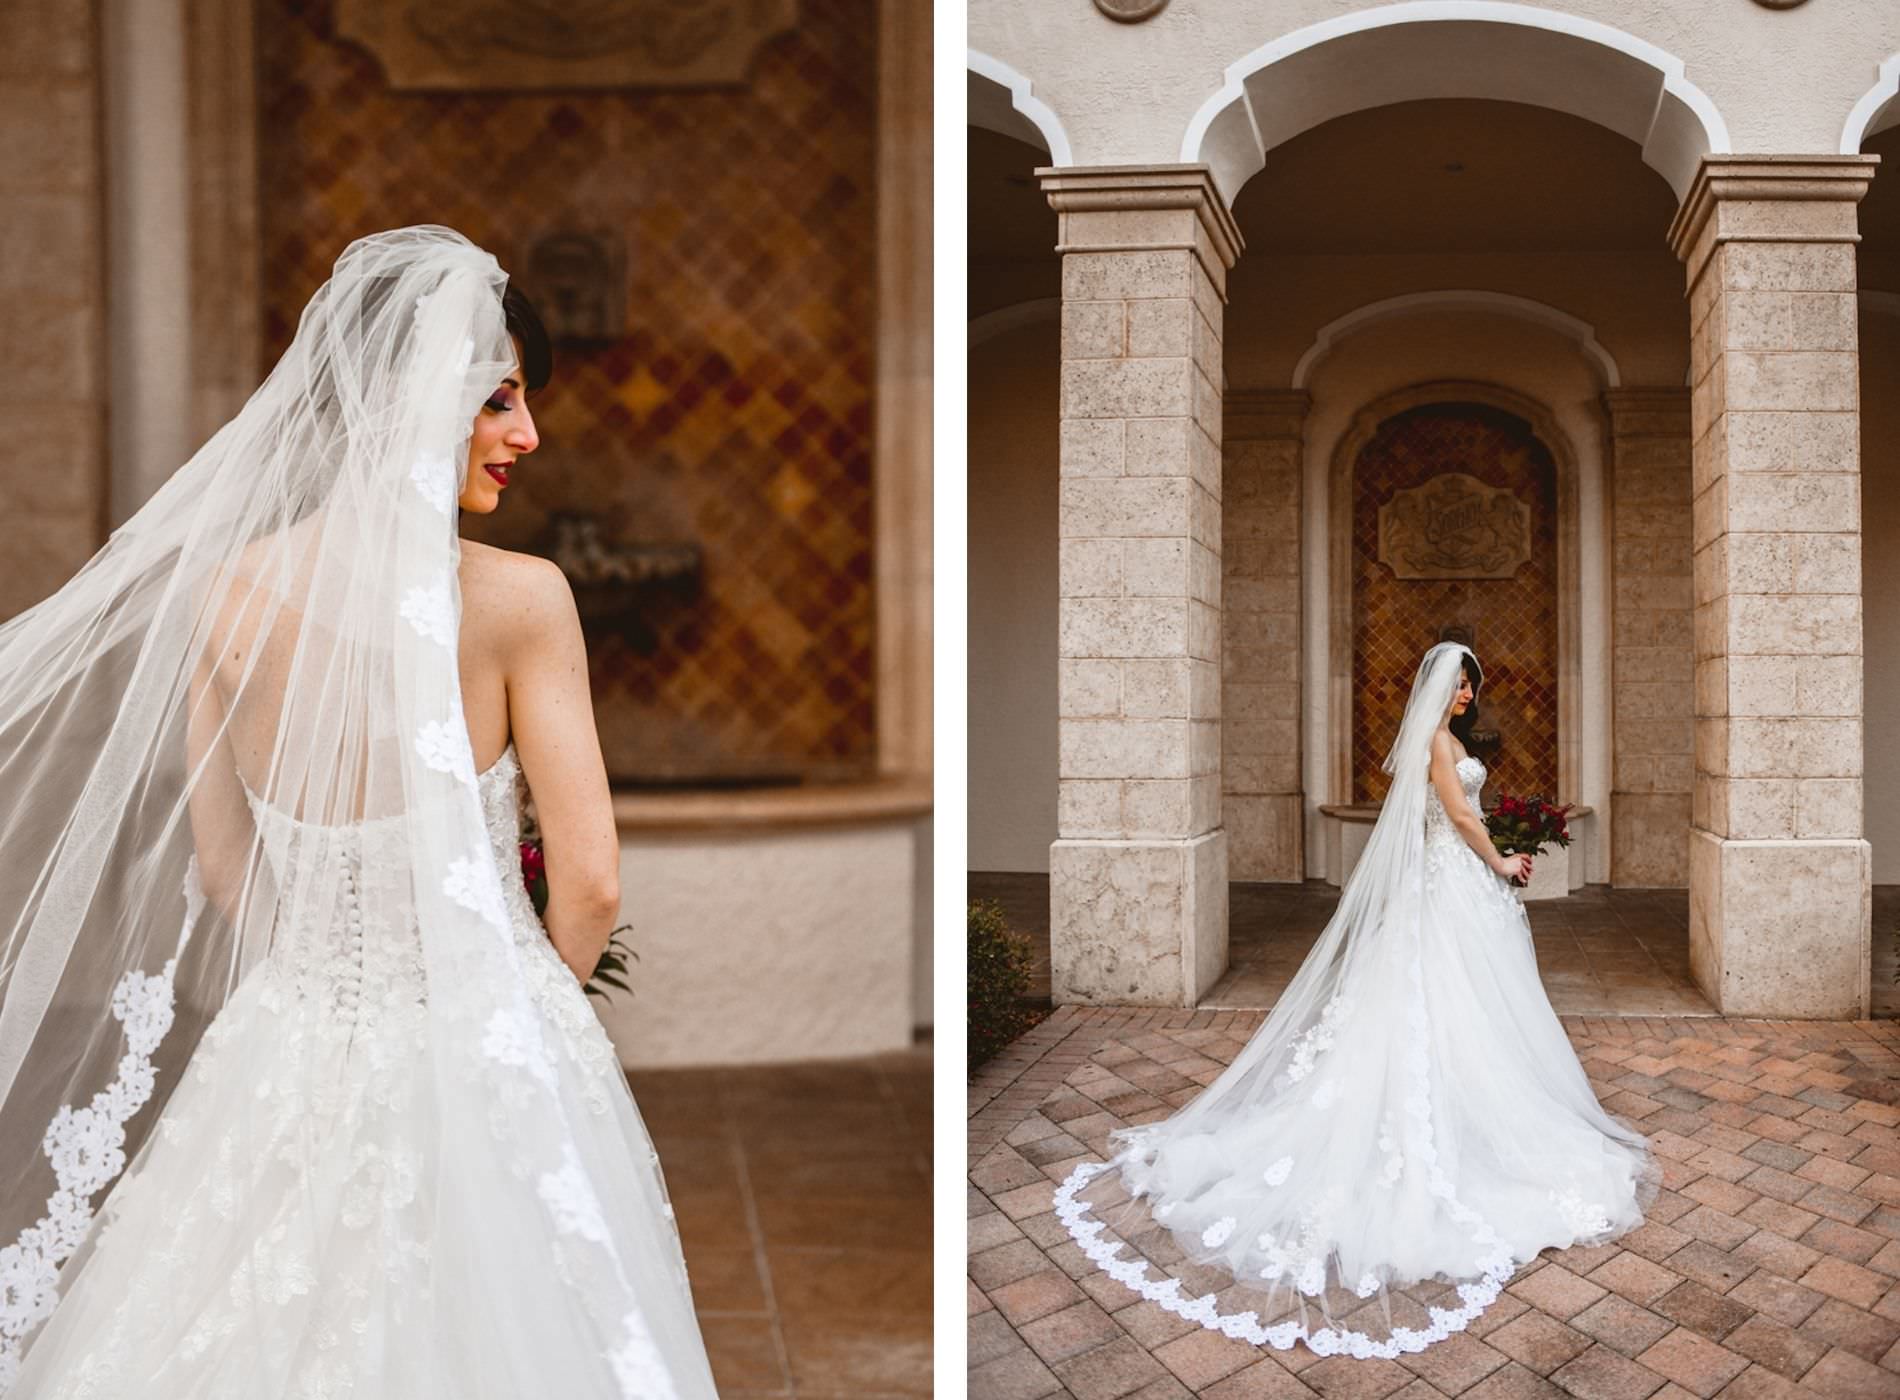 Tampa Bride in Essense of Australia Strapless Sweetheart Neckline Floral Applique and Tulle Skirt A-Line Wedding Dress Holding Red Floral Bouquet and Full Length Lace Veil Portrait